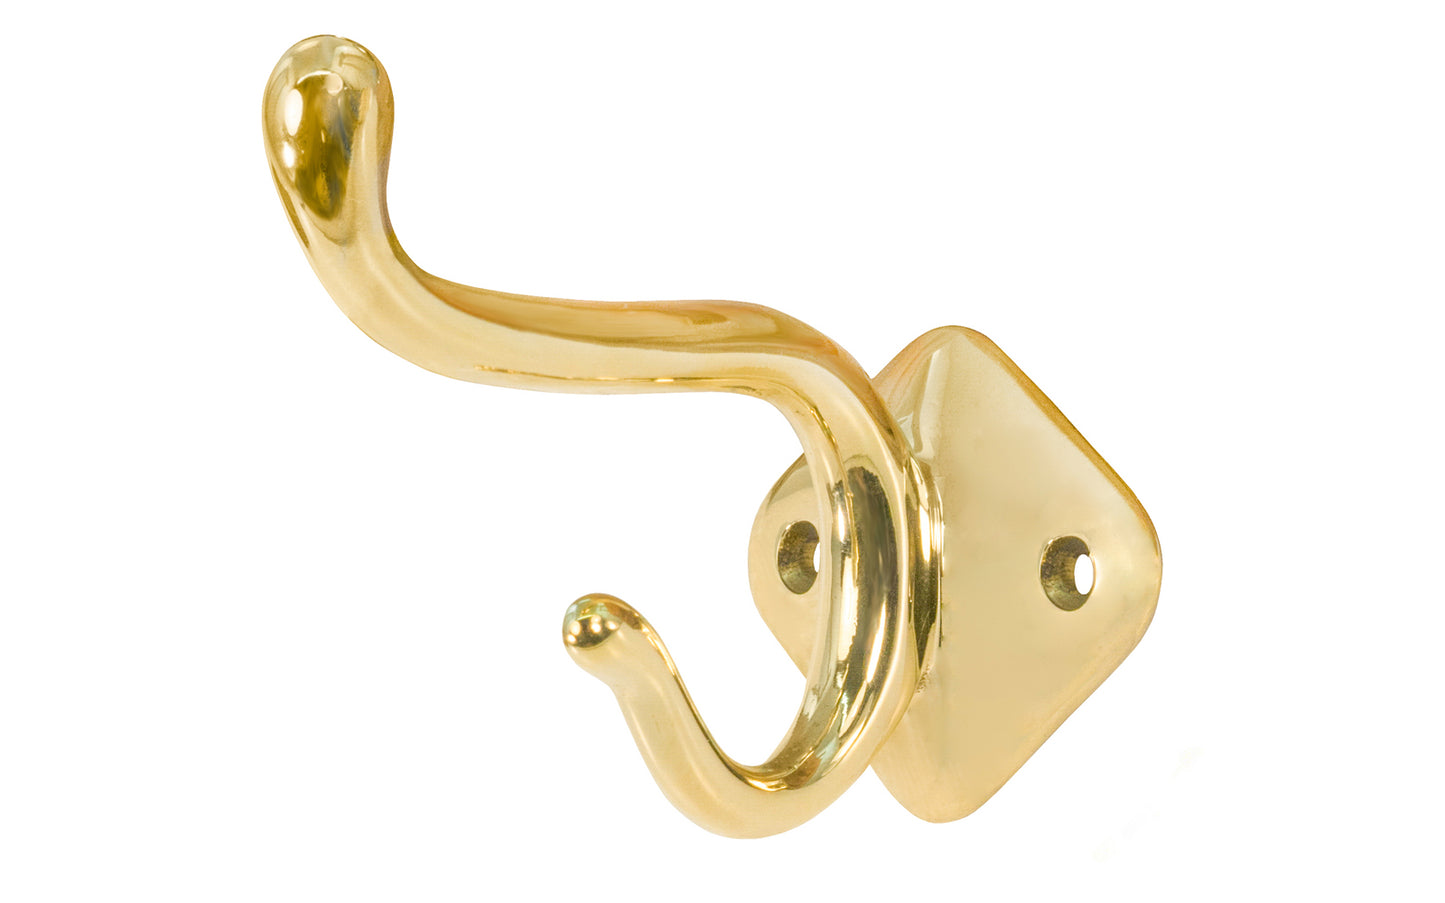 Vintage-style unlacquered brass double hook. For use in hallways, hall trees, kitchens, bathrooms, bedrooms. Made of solid brass, the hook is sturdy for heavy coats, bags & clothing. The hook is designed in a early 20th Century style, Arts & Crafts style of hardware. Non-lacquered brass. Authentic reproduction hardware